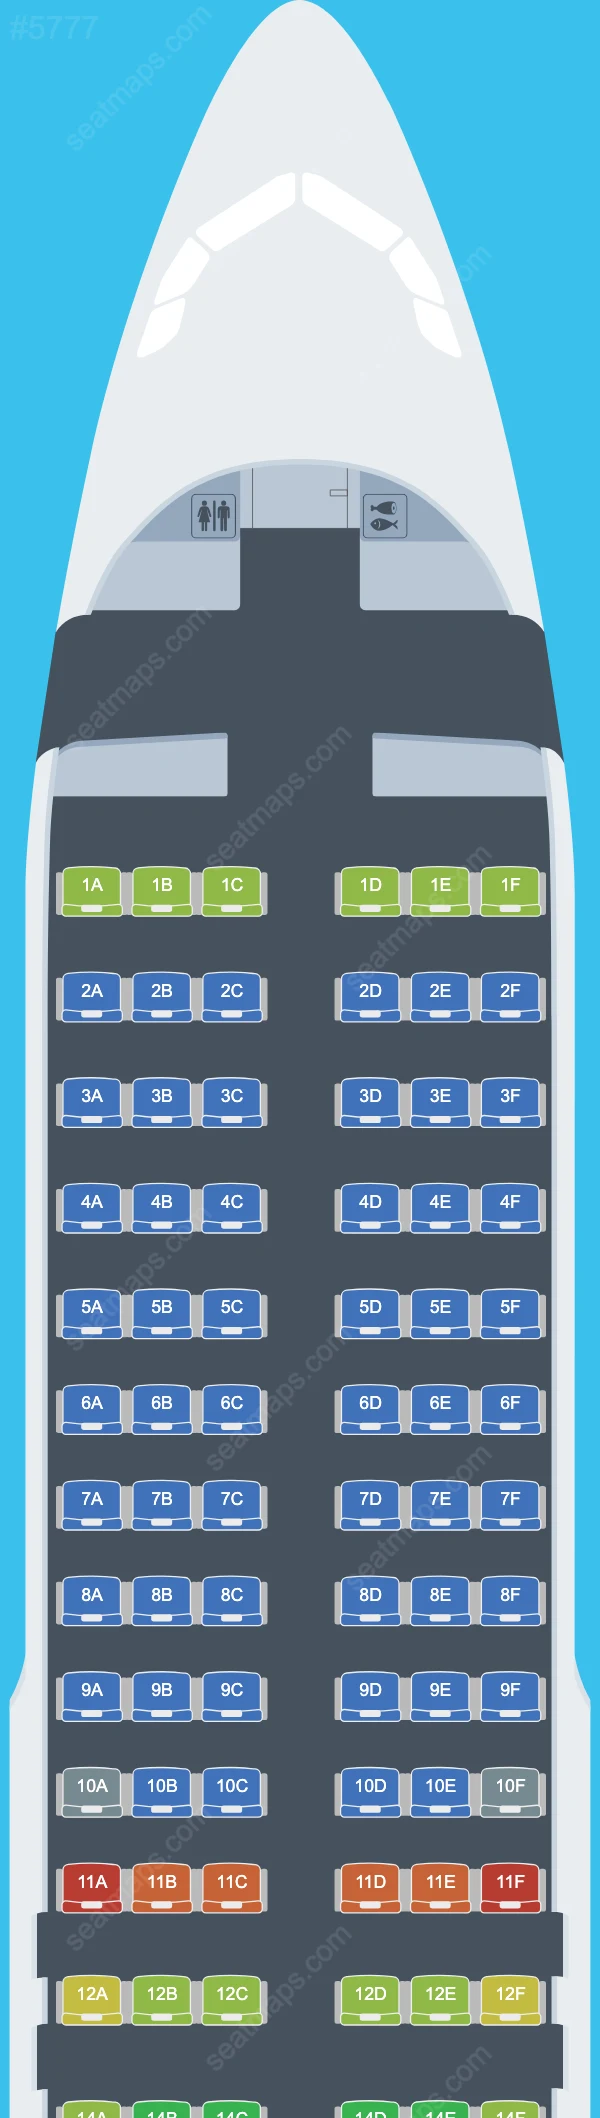 Eurowings Airbus A320 Seat Maps A320-200 V.1